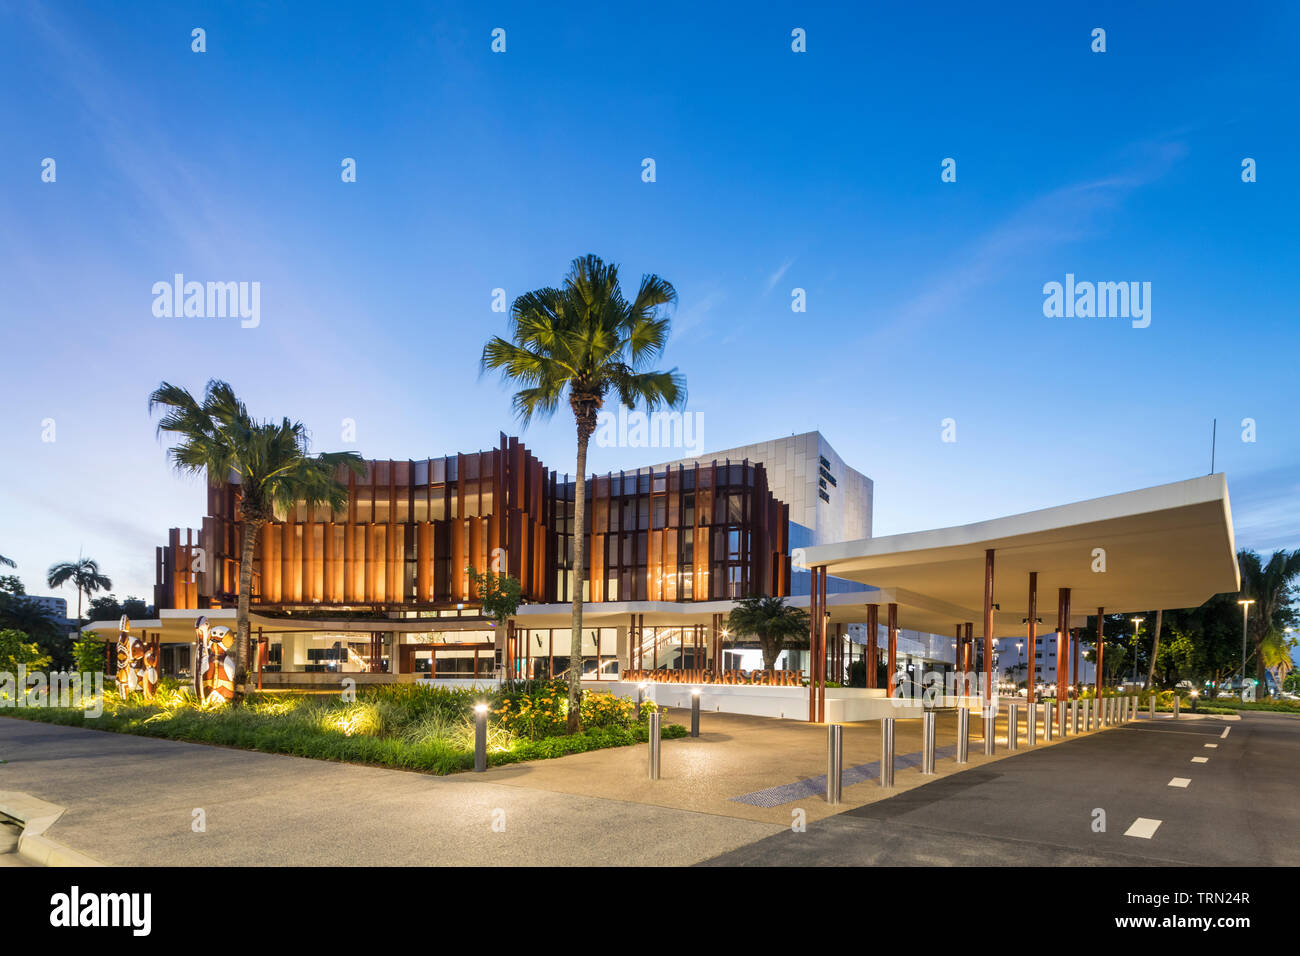 The Cairns Performing Arts Centre illuminated at twilight, Cairns, Queensland, Australia Stock Photo